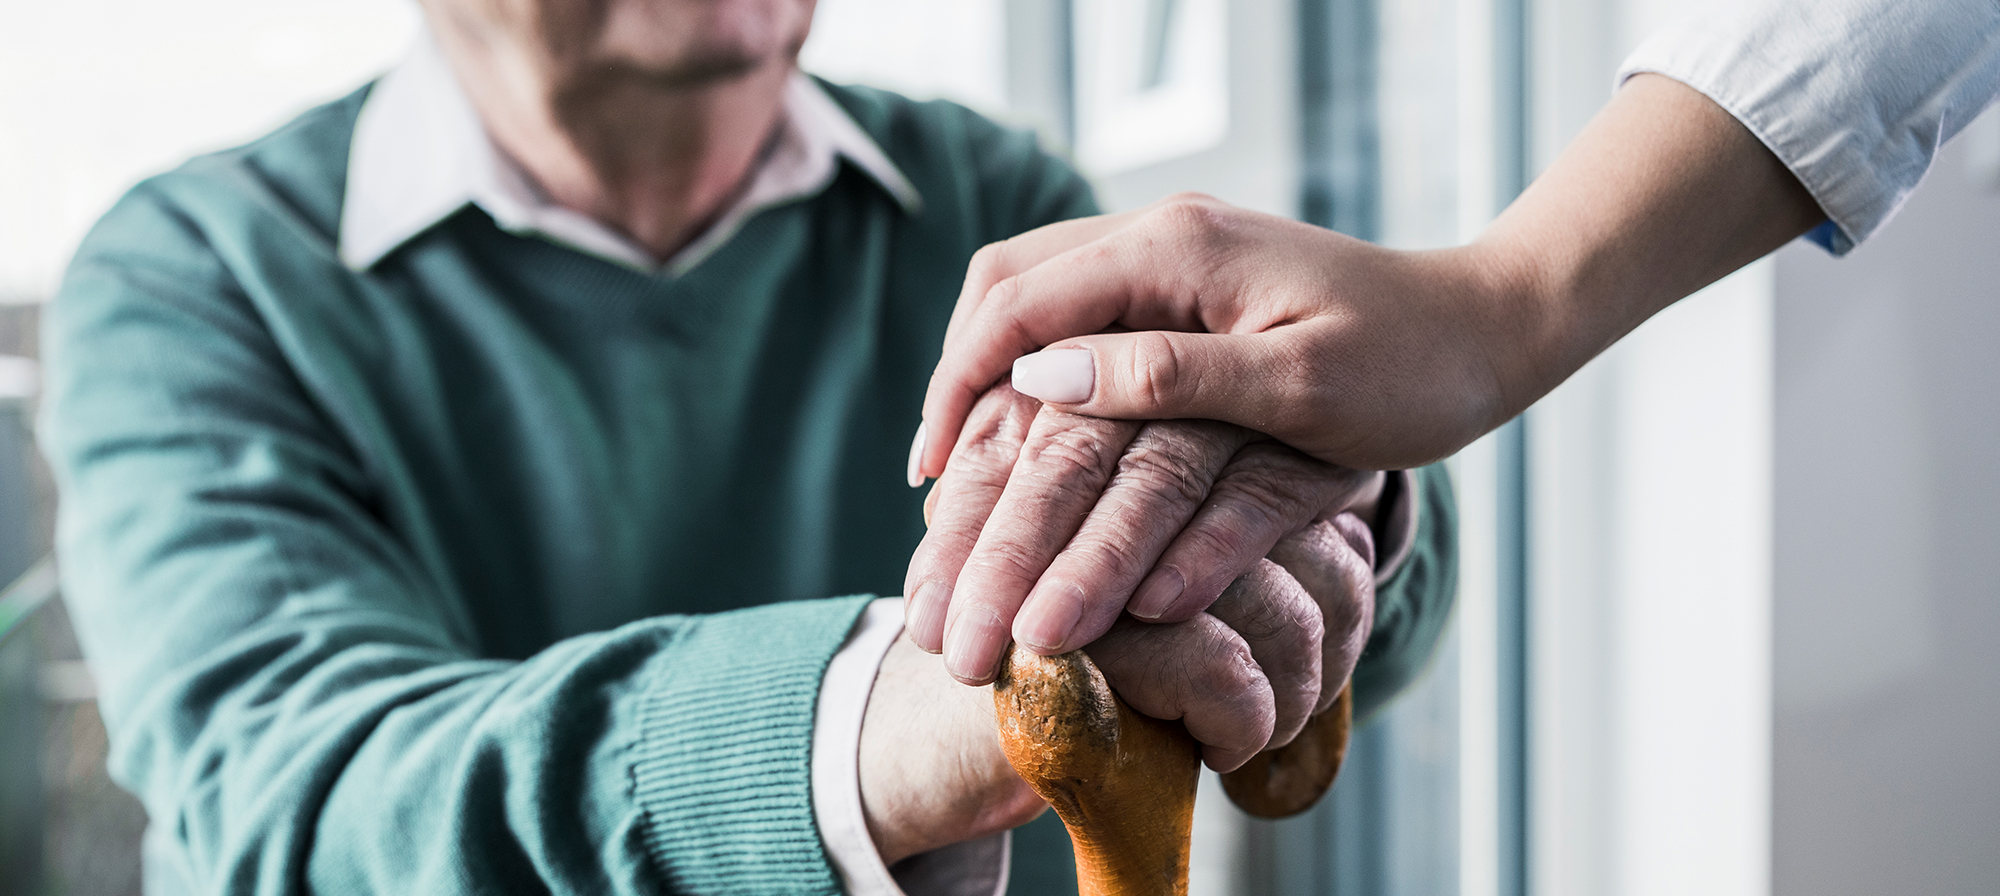 11 Ways to Play a Supporting Role as a Caregiver